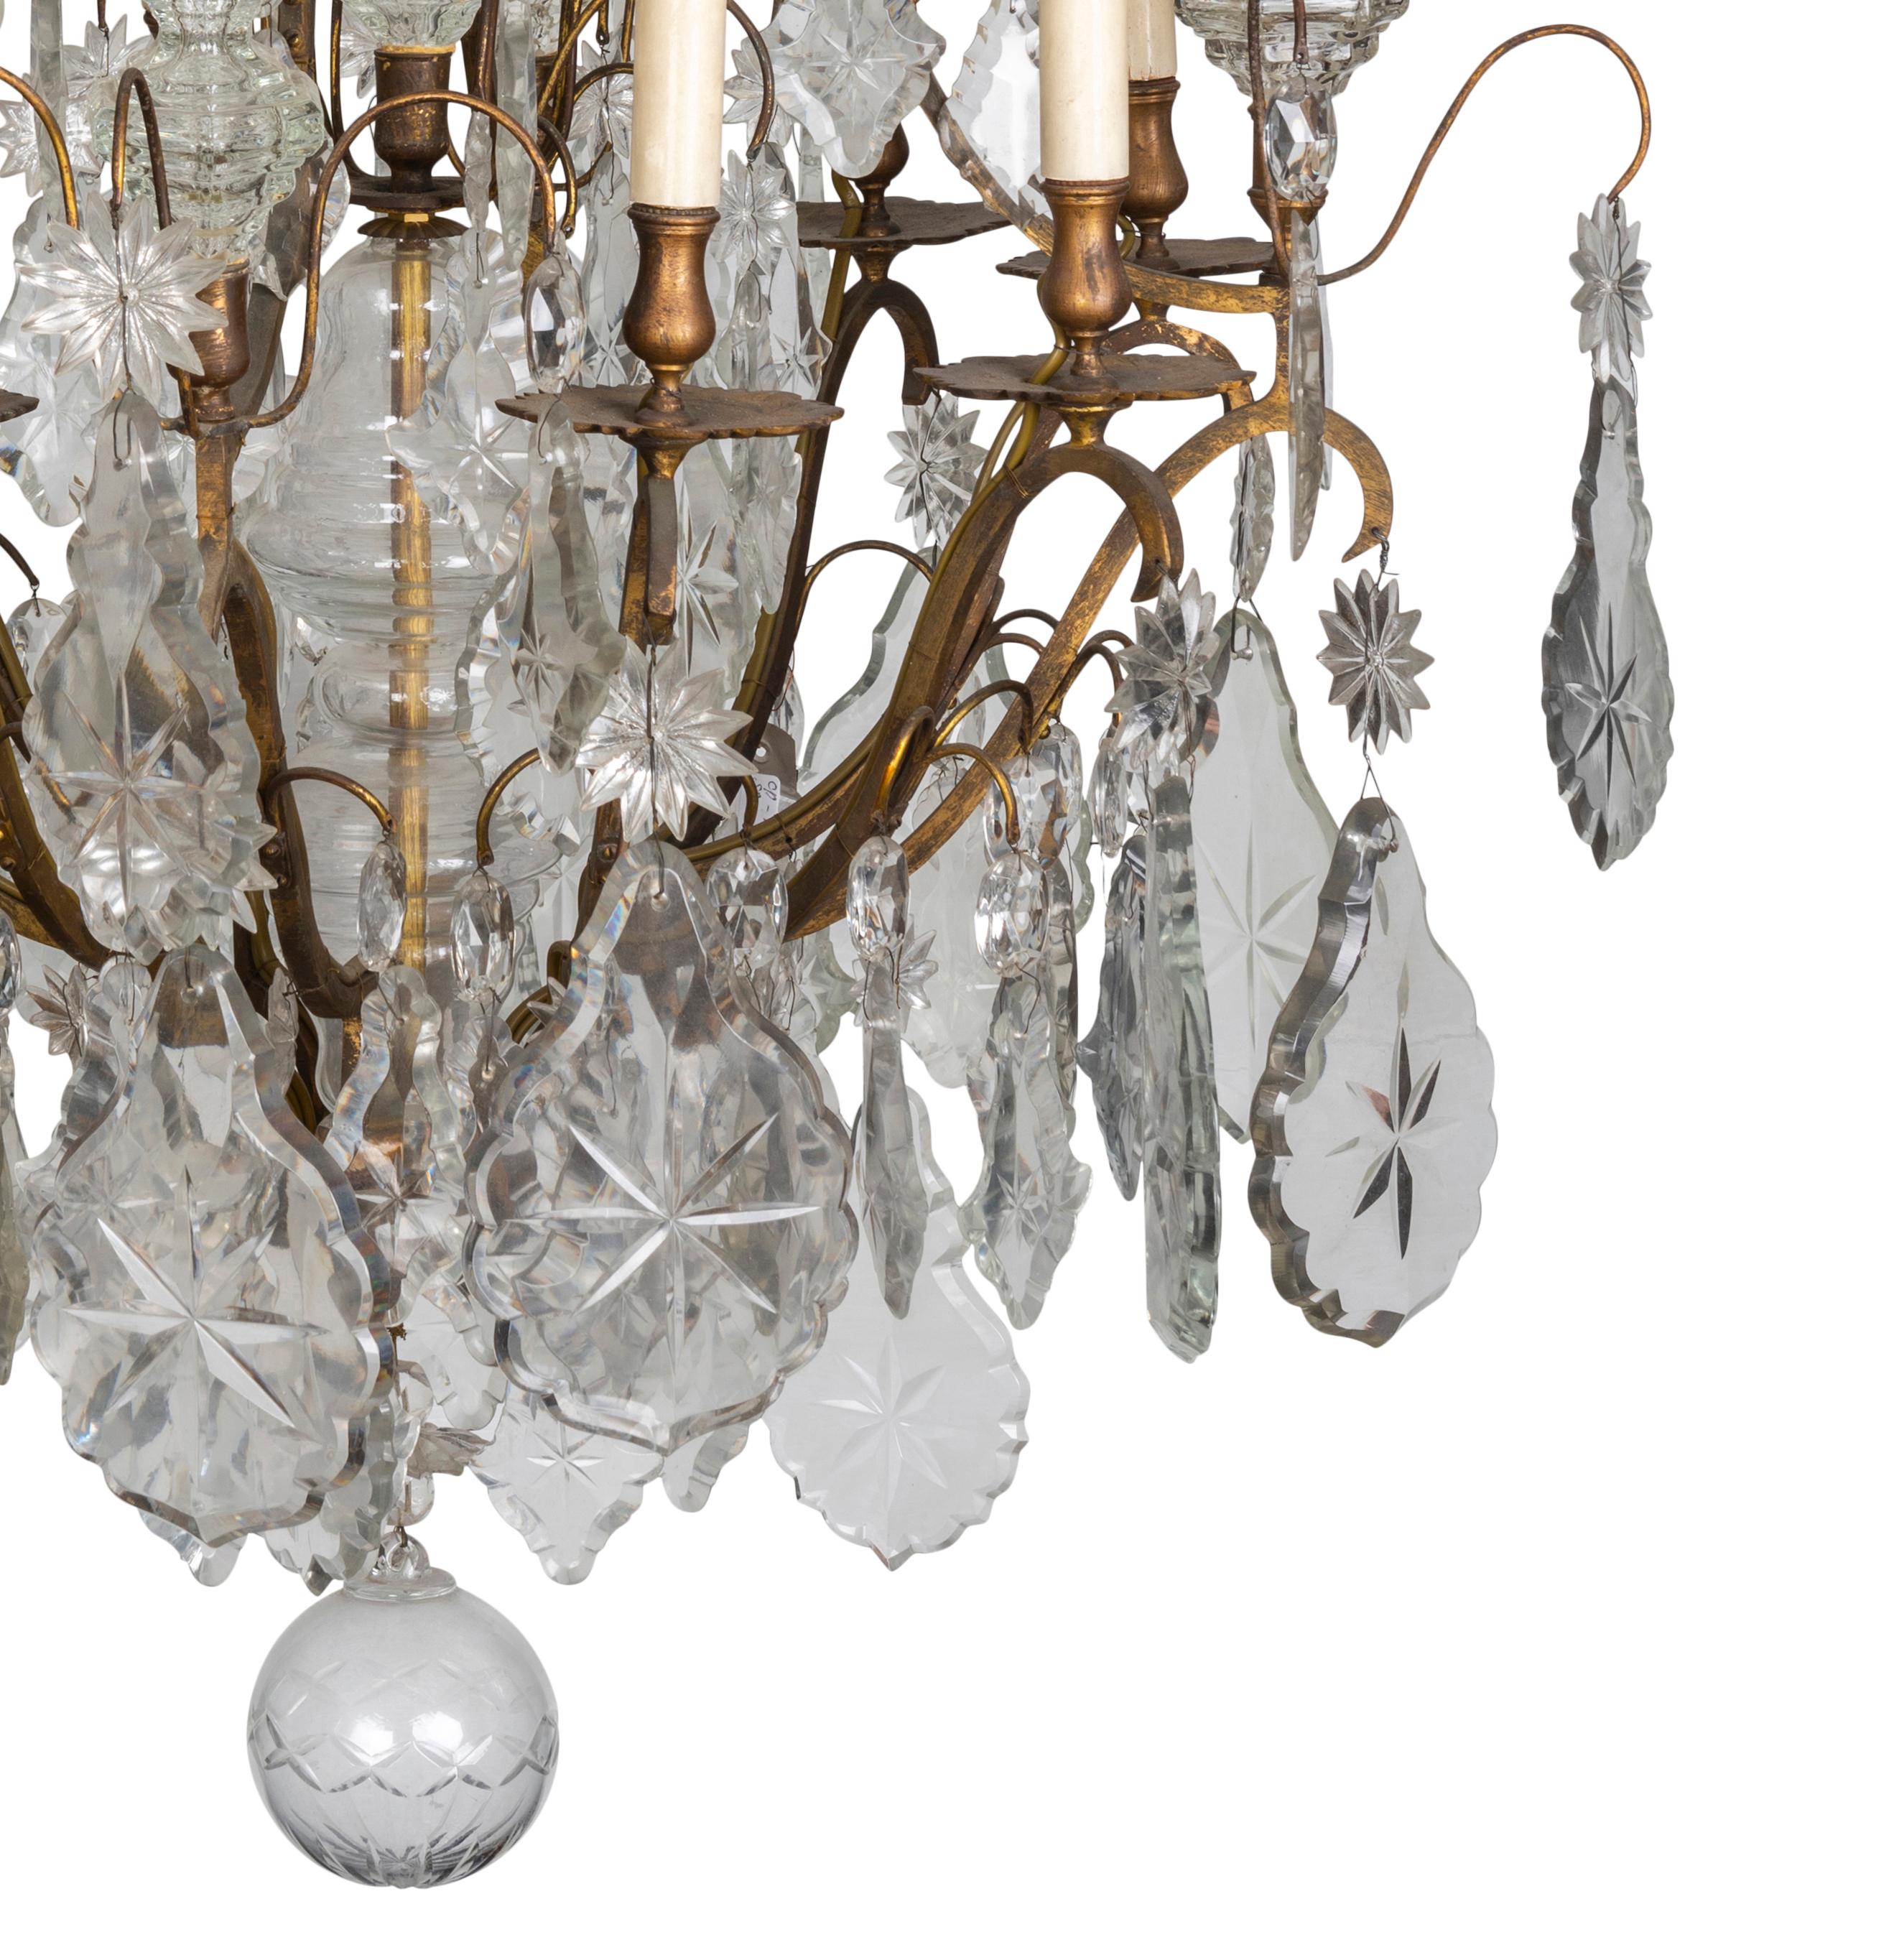 Regency A Pair of Early 19th Century French Louis XV Style Crystal & Ormolu Chandeliers For Sale